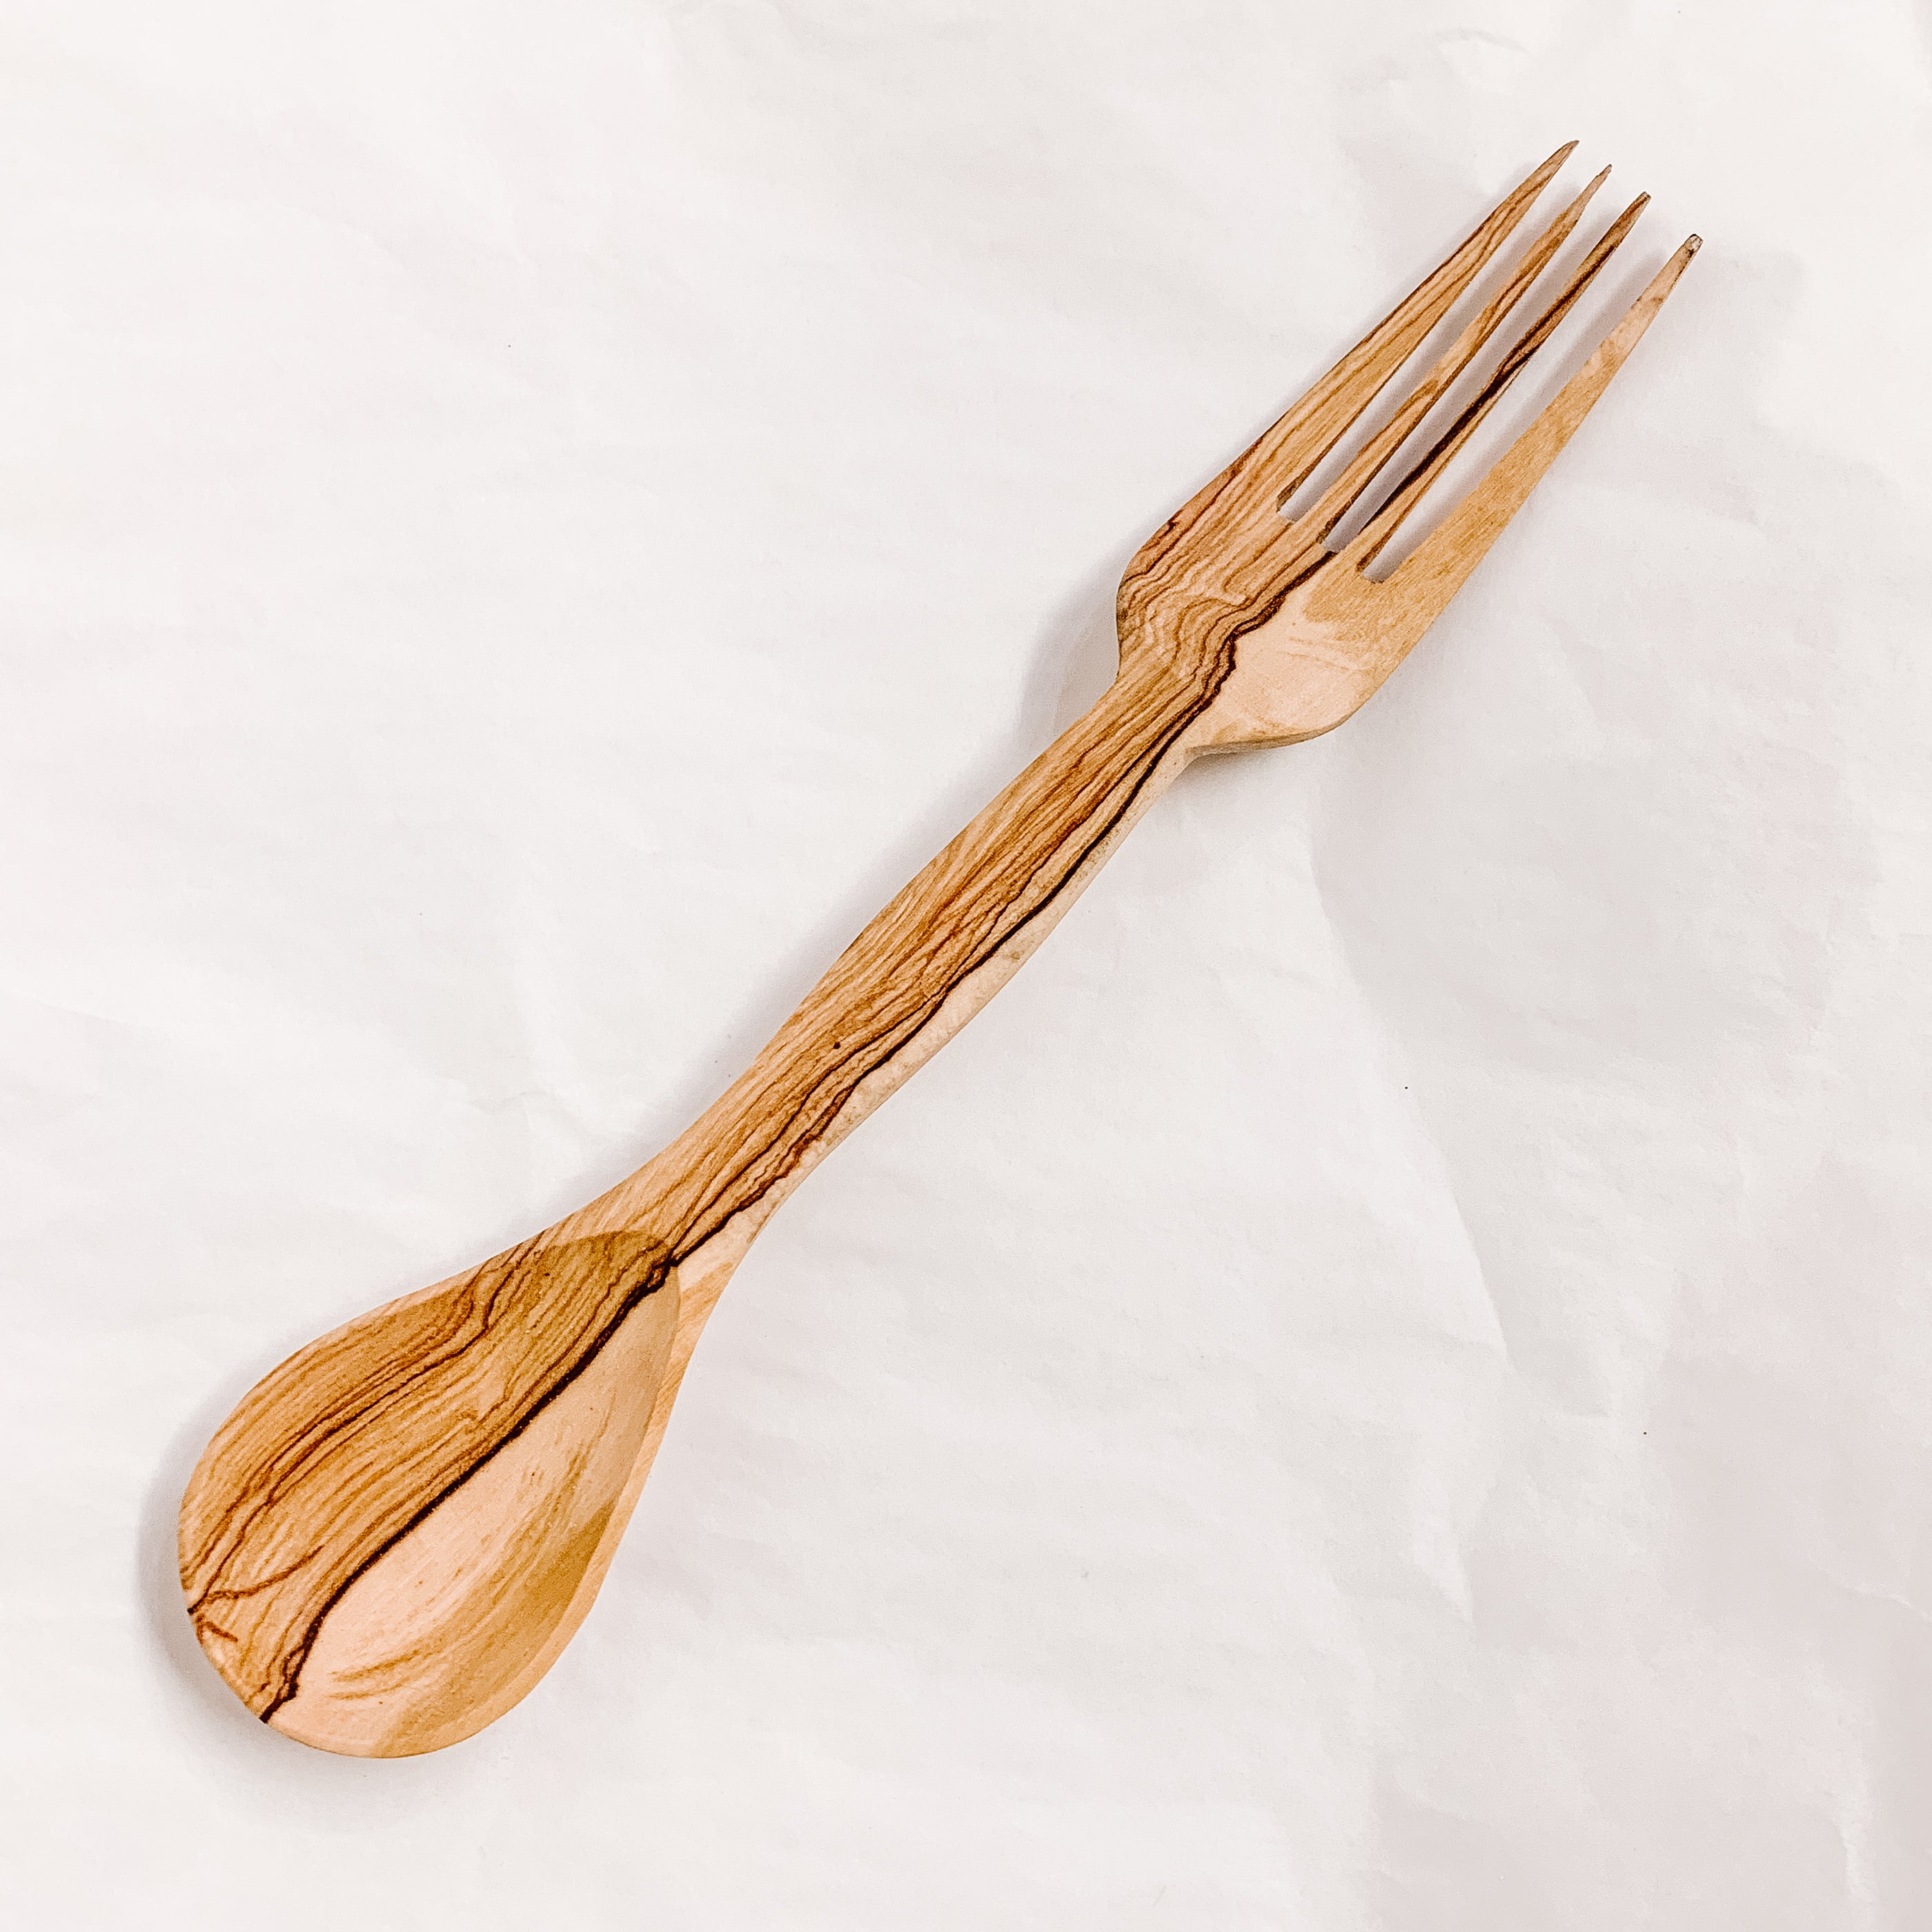 JustOne's spork with one side as a spoon and the other as a fork, handcrafted from wood in Kenya